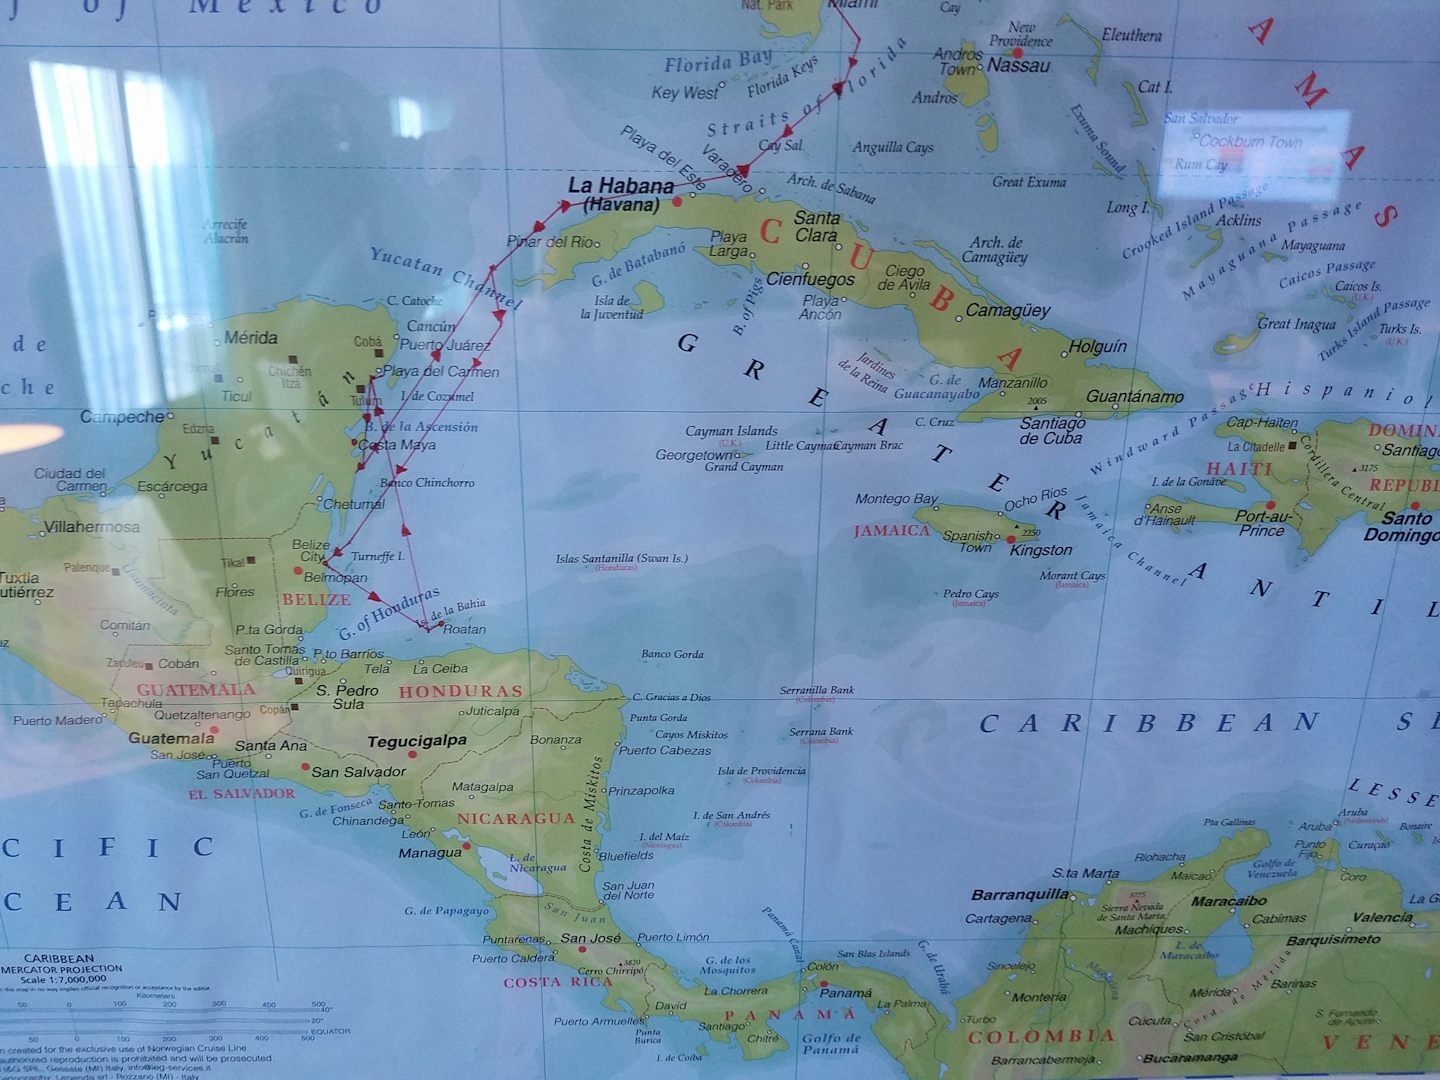 Route of our western caribbean itinerary. There was alot of chatter pre-cruise about the ports/dates changing. NCL; the communicative folks that they are, neglected to update or inform guest prior to embarking. Woke up one morning like, SURPRISE!!! Funny but not funny. If my excursions had been booked with a third party, it would have given me grief resolving the issue (while roaming).